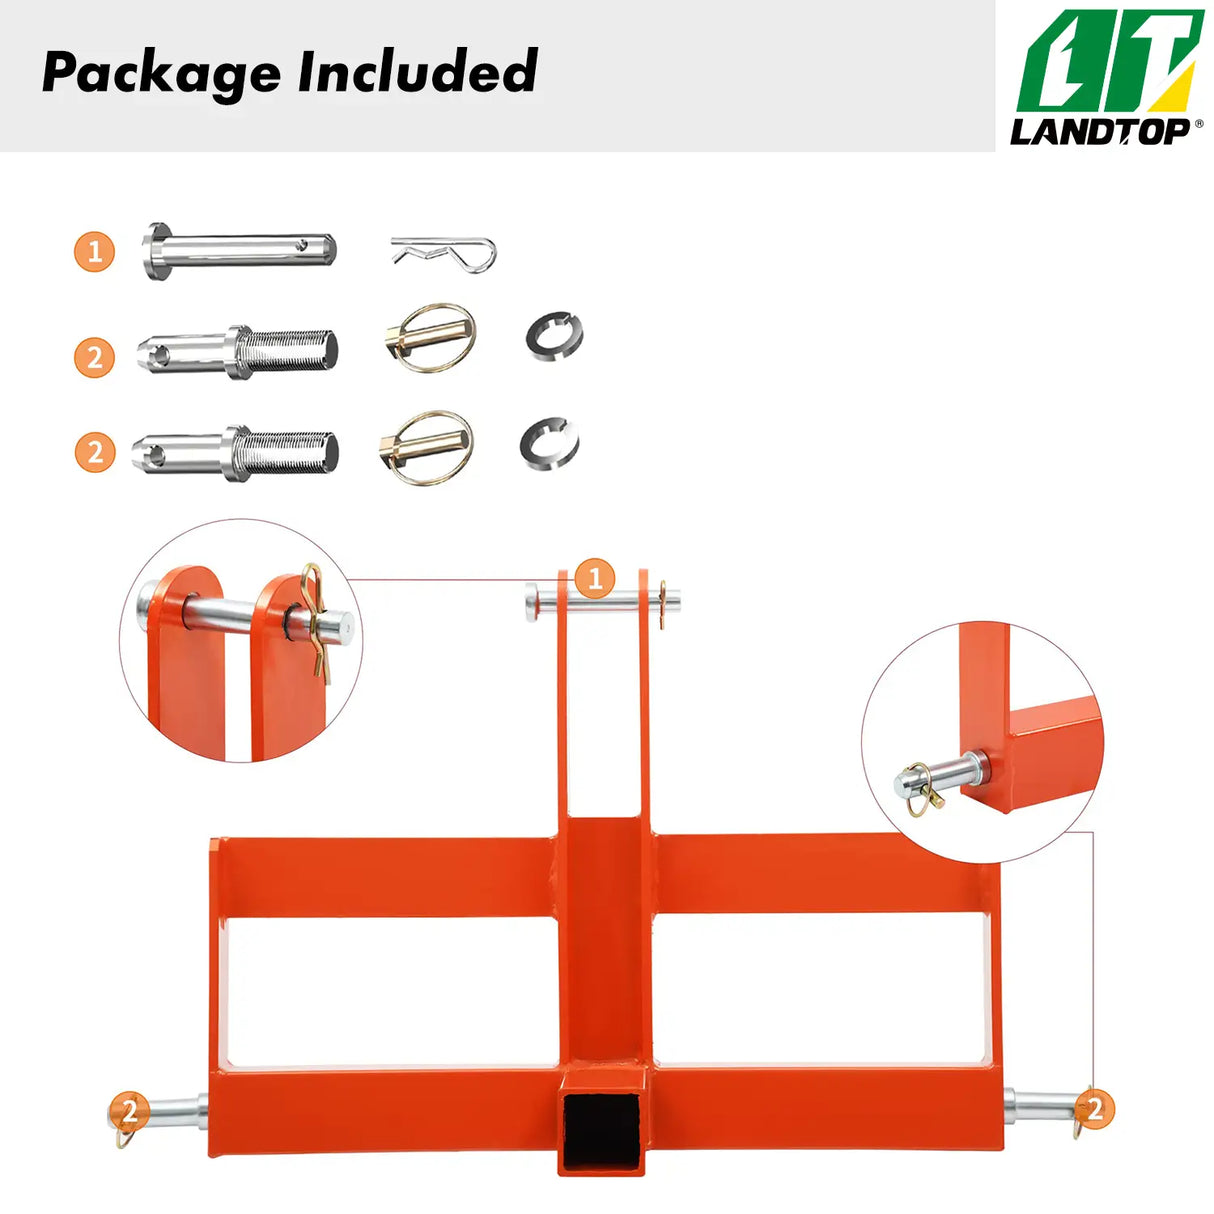 3 Point Hitch Receiver for Category 1, 2" Receiver Tractor Drawbar Attachments with Suitcase Weight Brackets, Orange